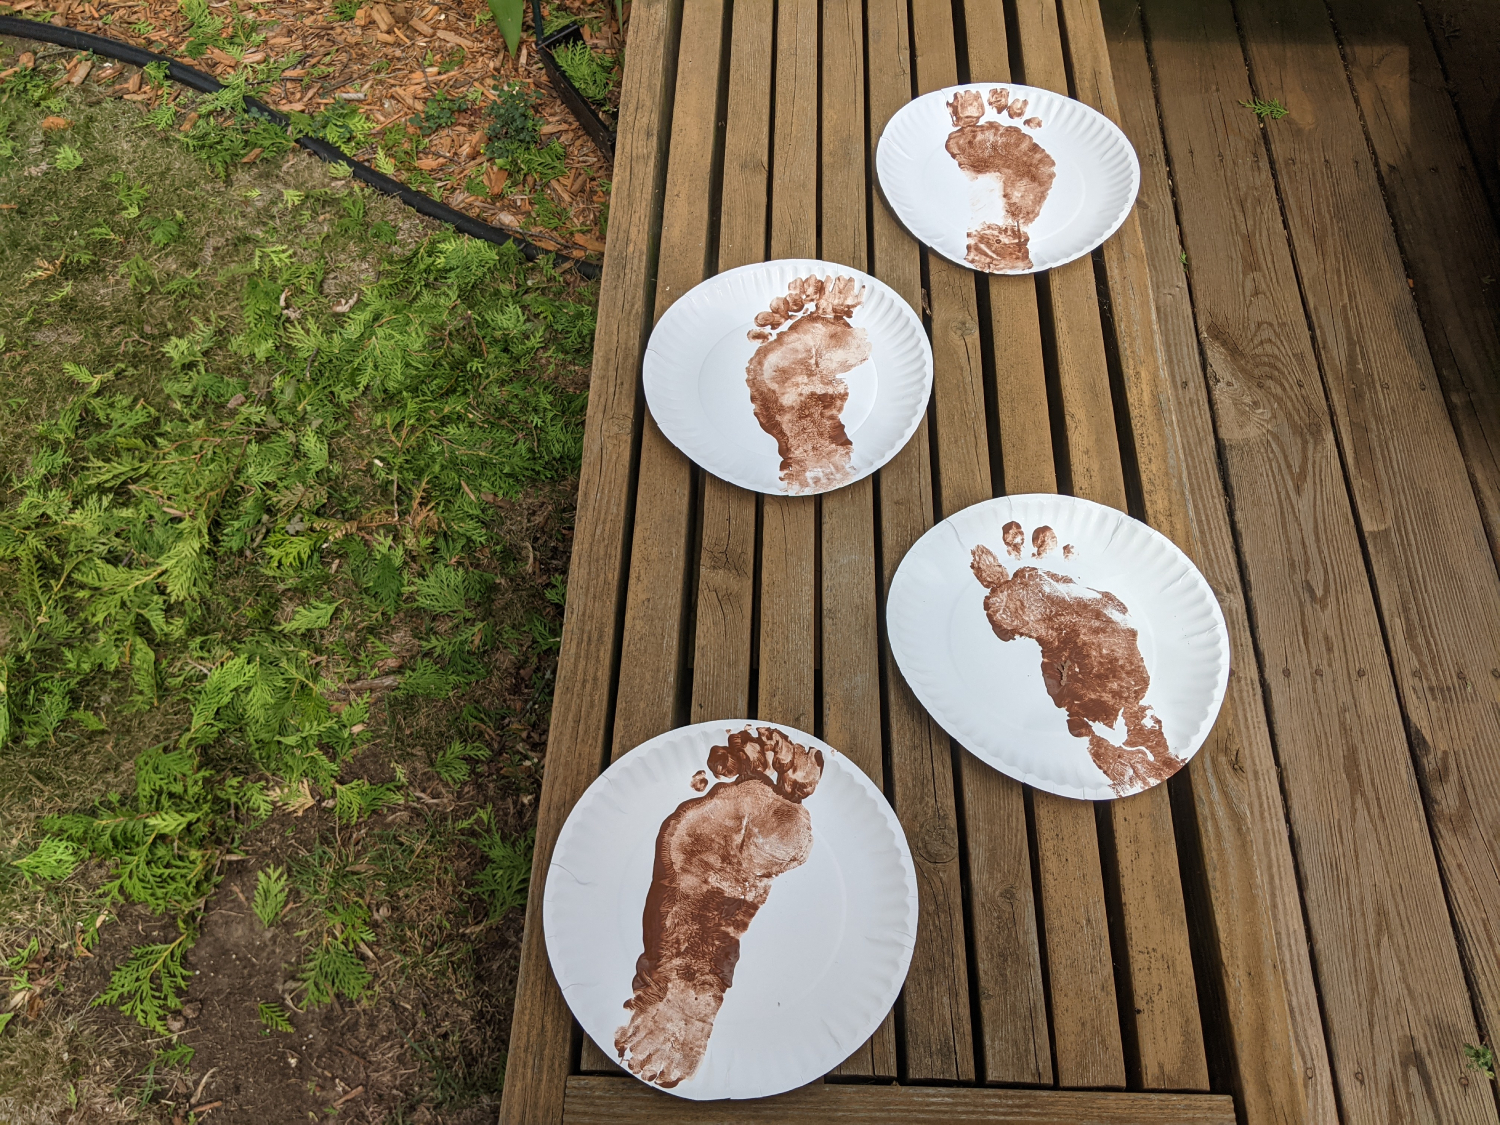 Paper plates with painted footprints are drying on a wooden porch